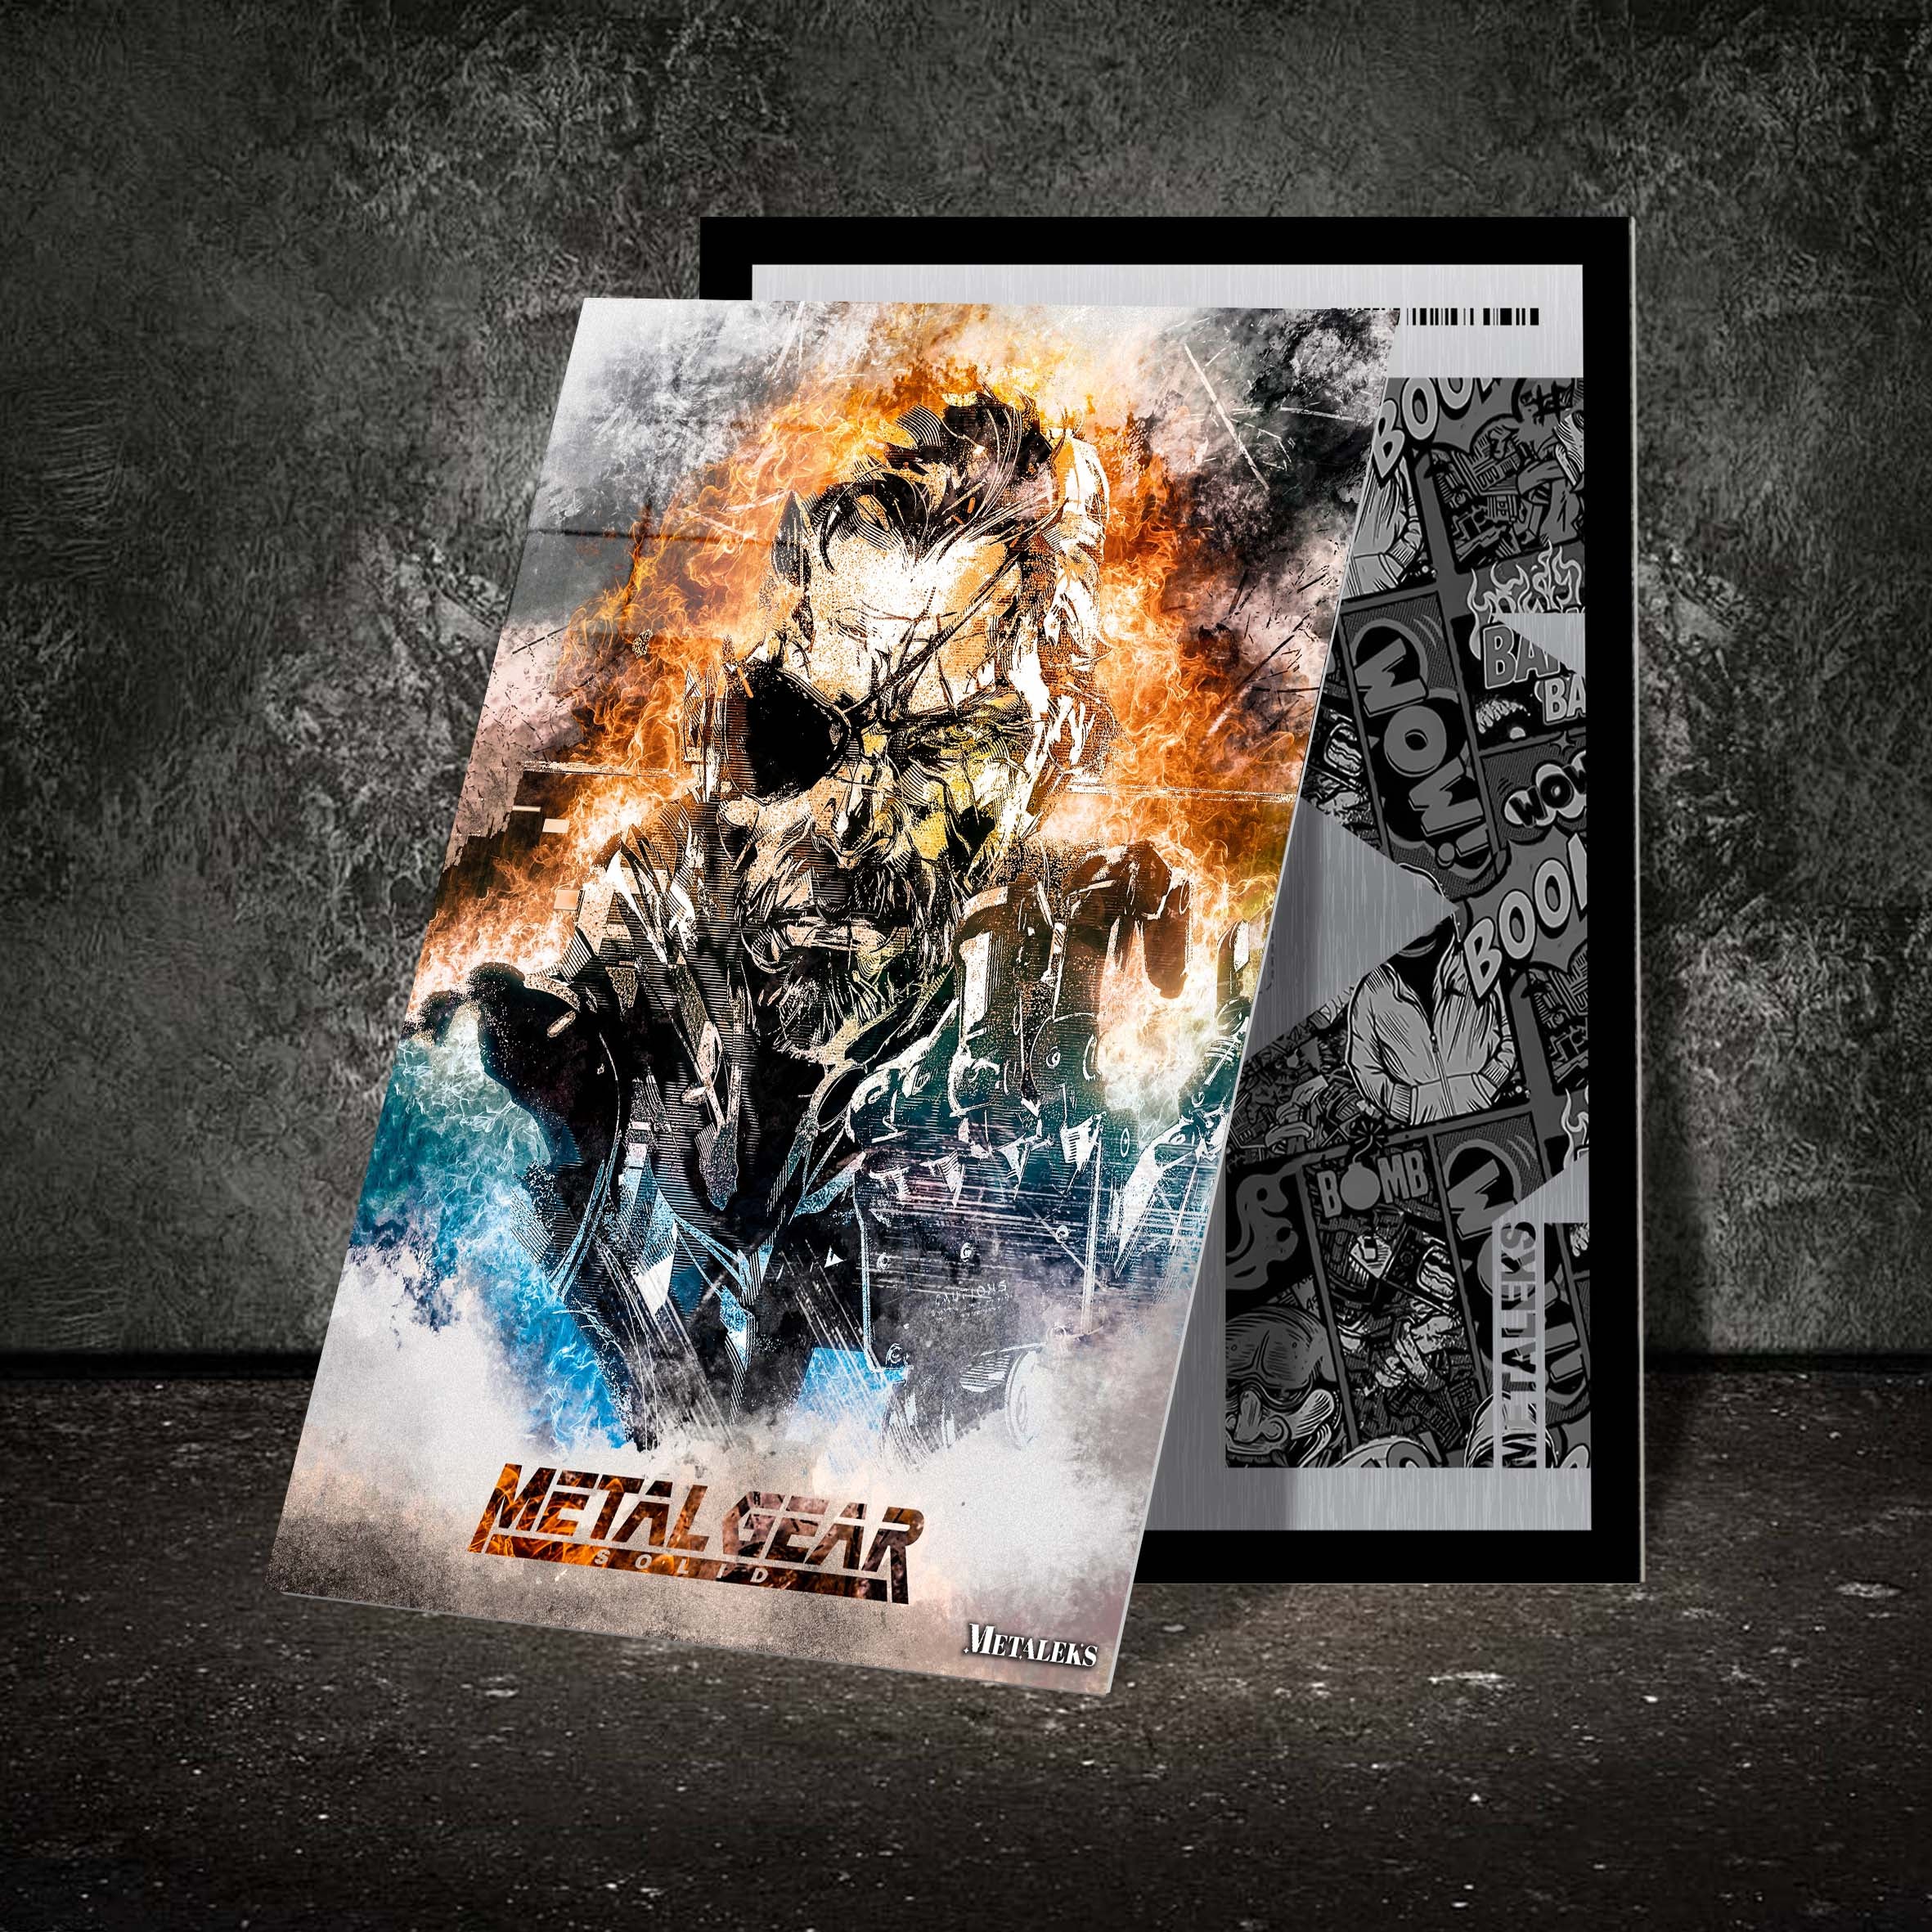 Metal Gear Solid Poster --designed by @Goldfingers